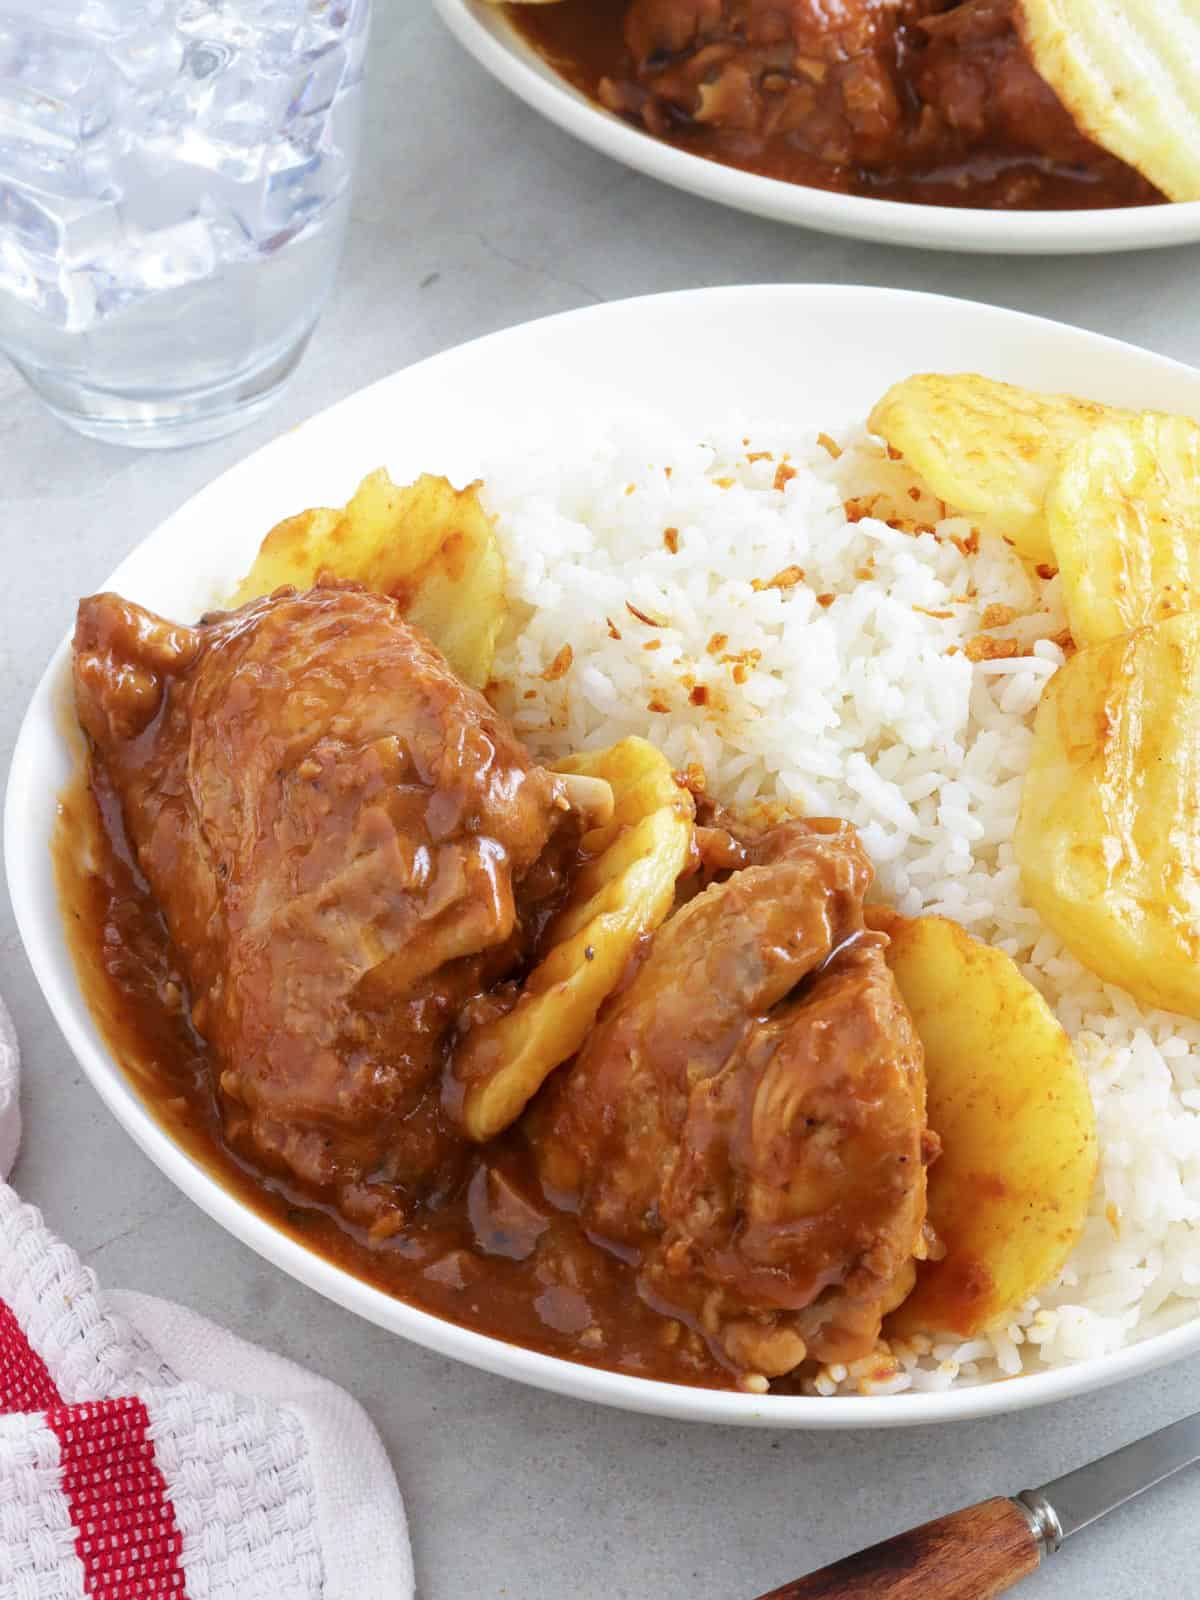 asadong manok with steamed rice on a white plate